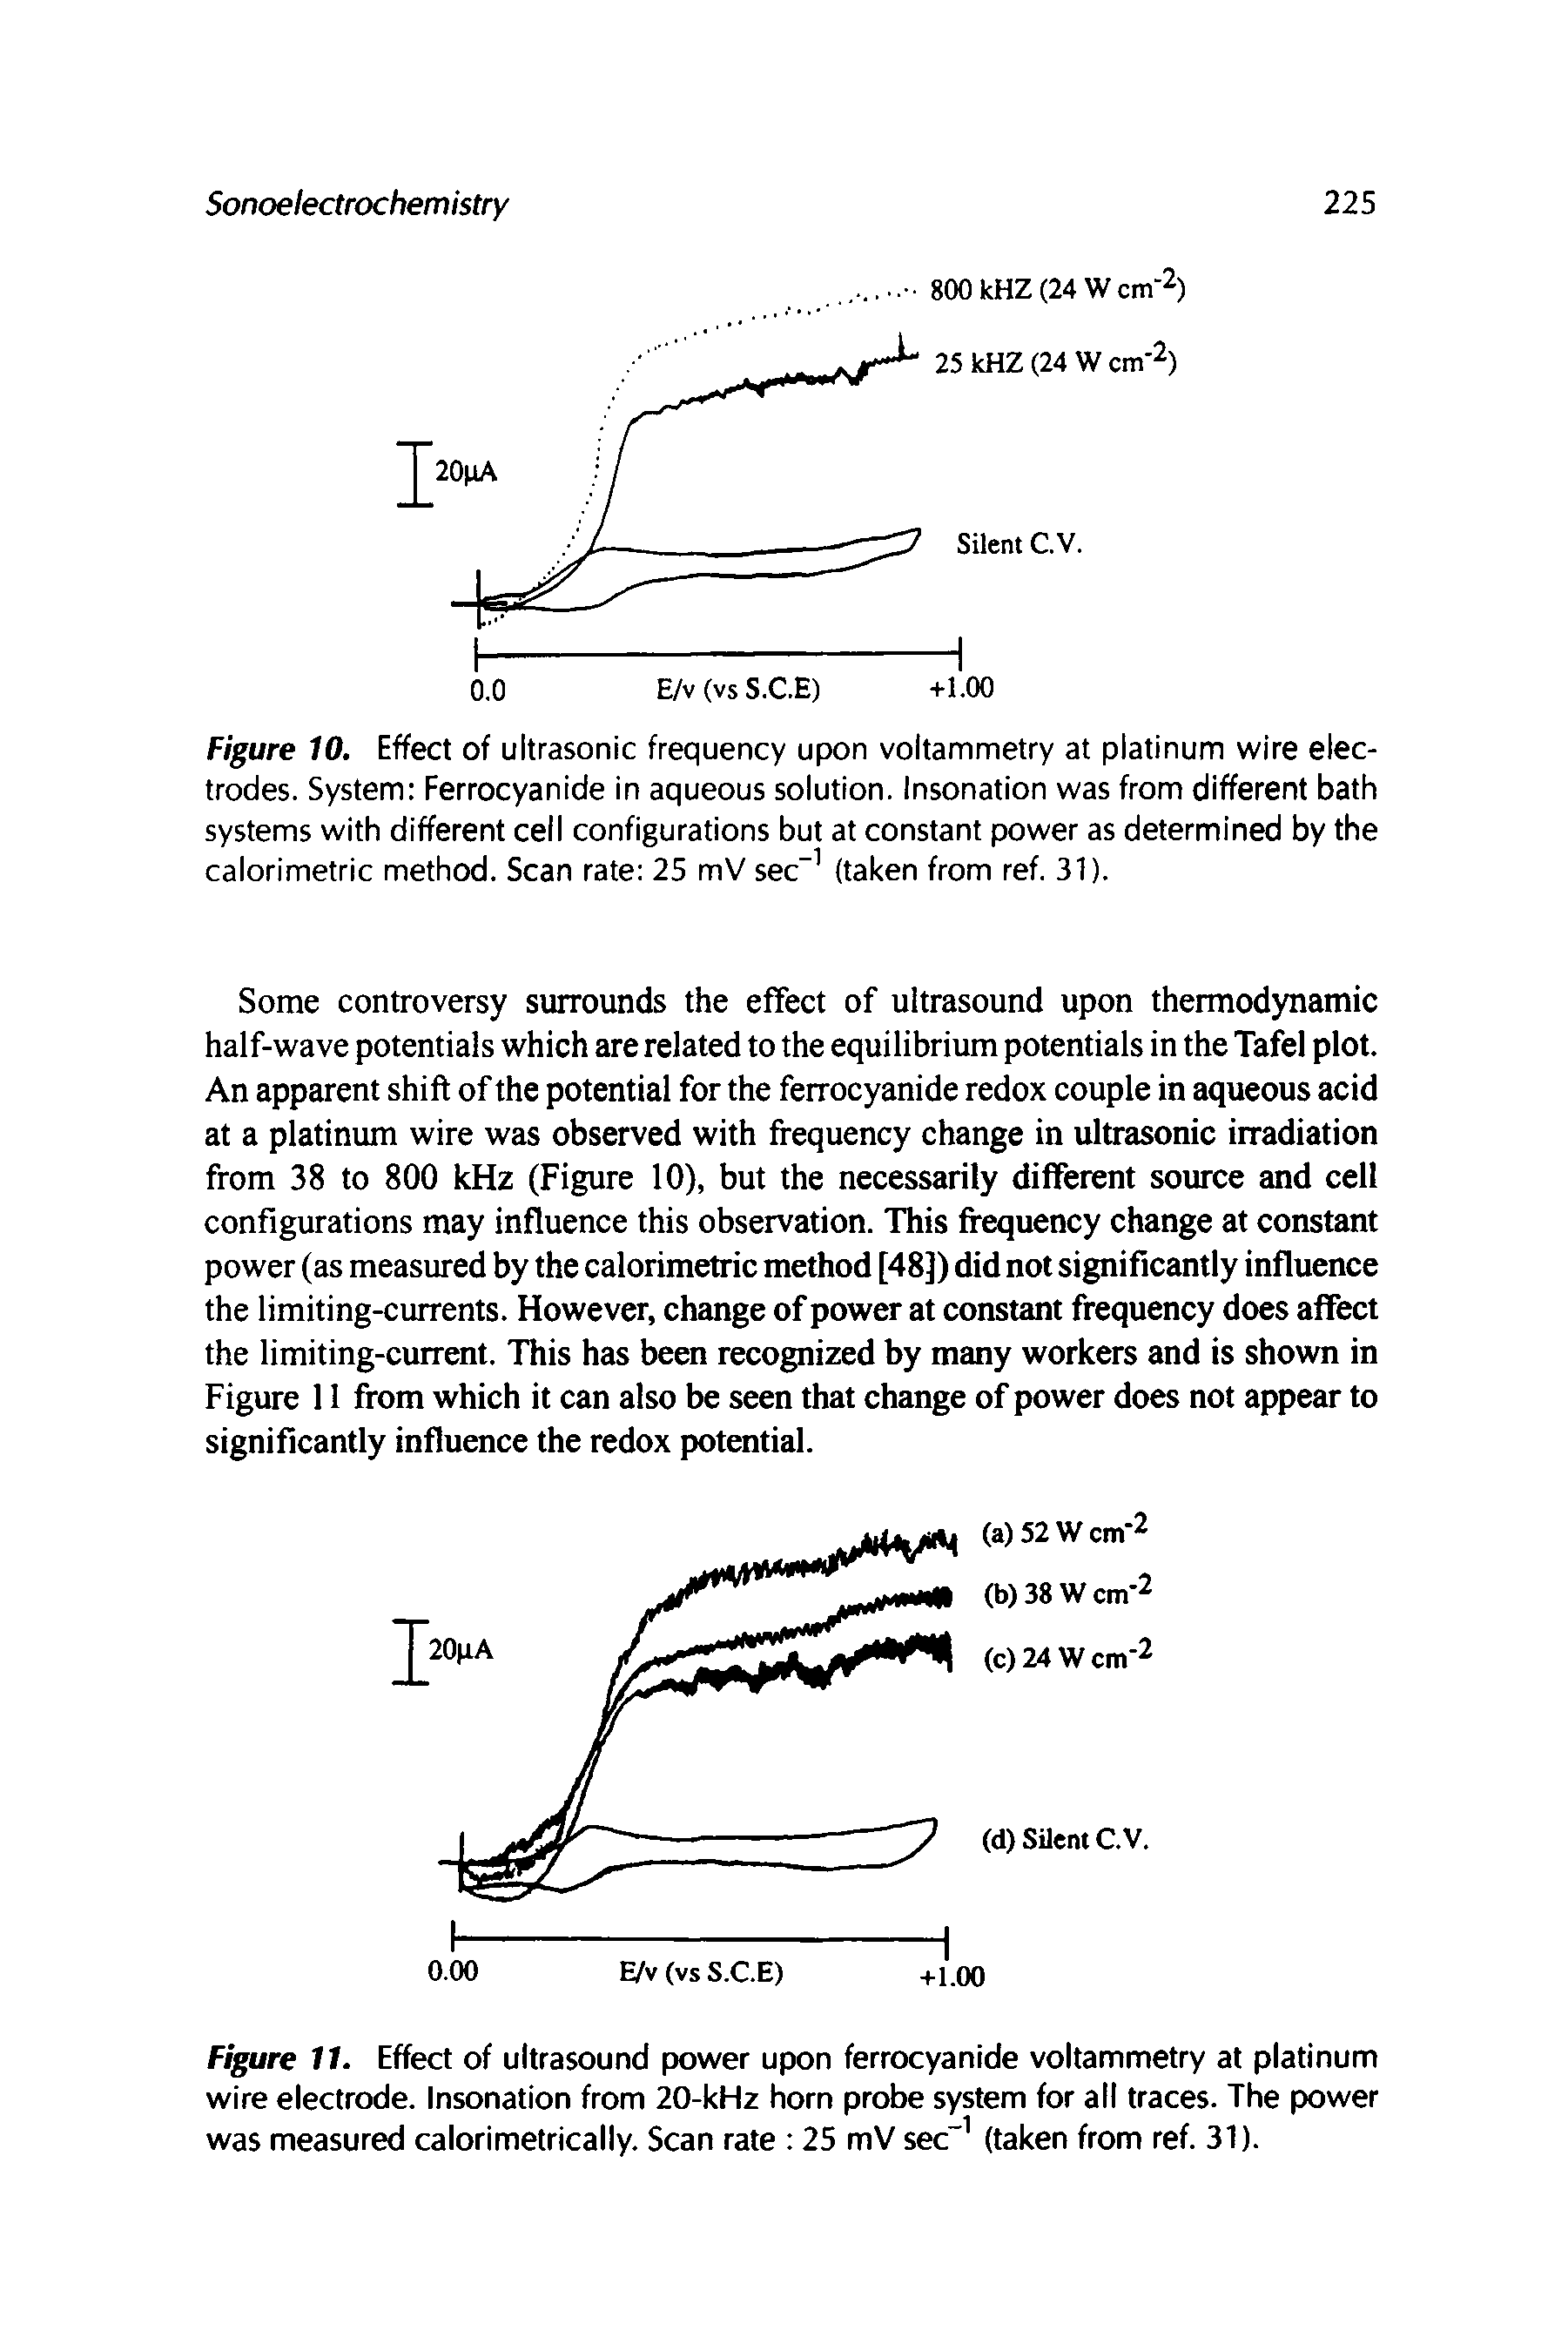 Figure 10. Effect of ultrasonic frequency upon voltammetry at platinum wire electrodes. System Ferrocyanide in aqueous solution. Insonation was from different bath systems with different cell configurations but at constant power as determined by the calorimetric method. Scan rate 25 mV sec-1 (taken from ref. 31).